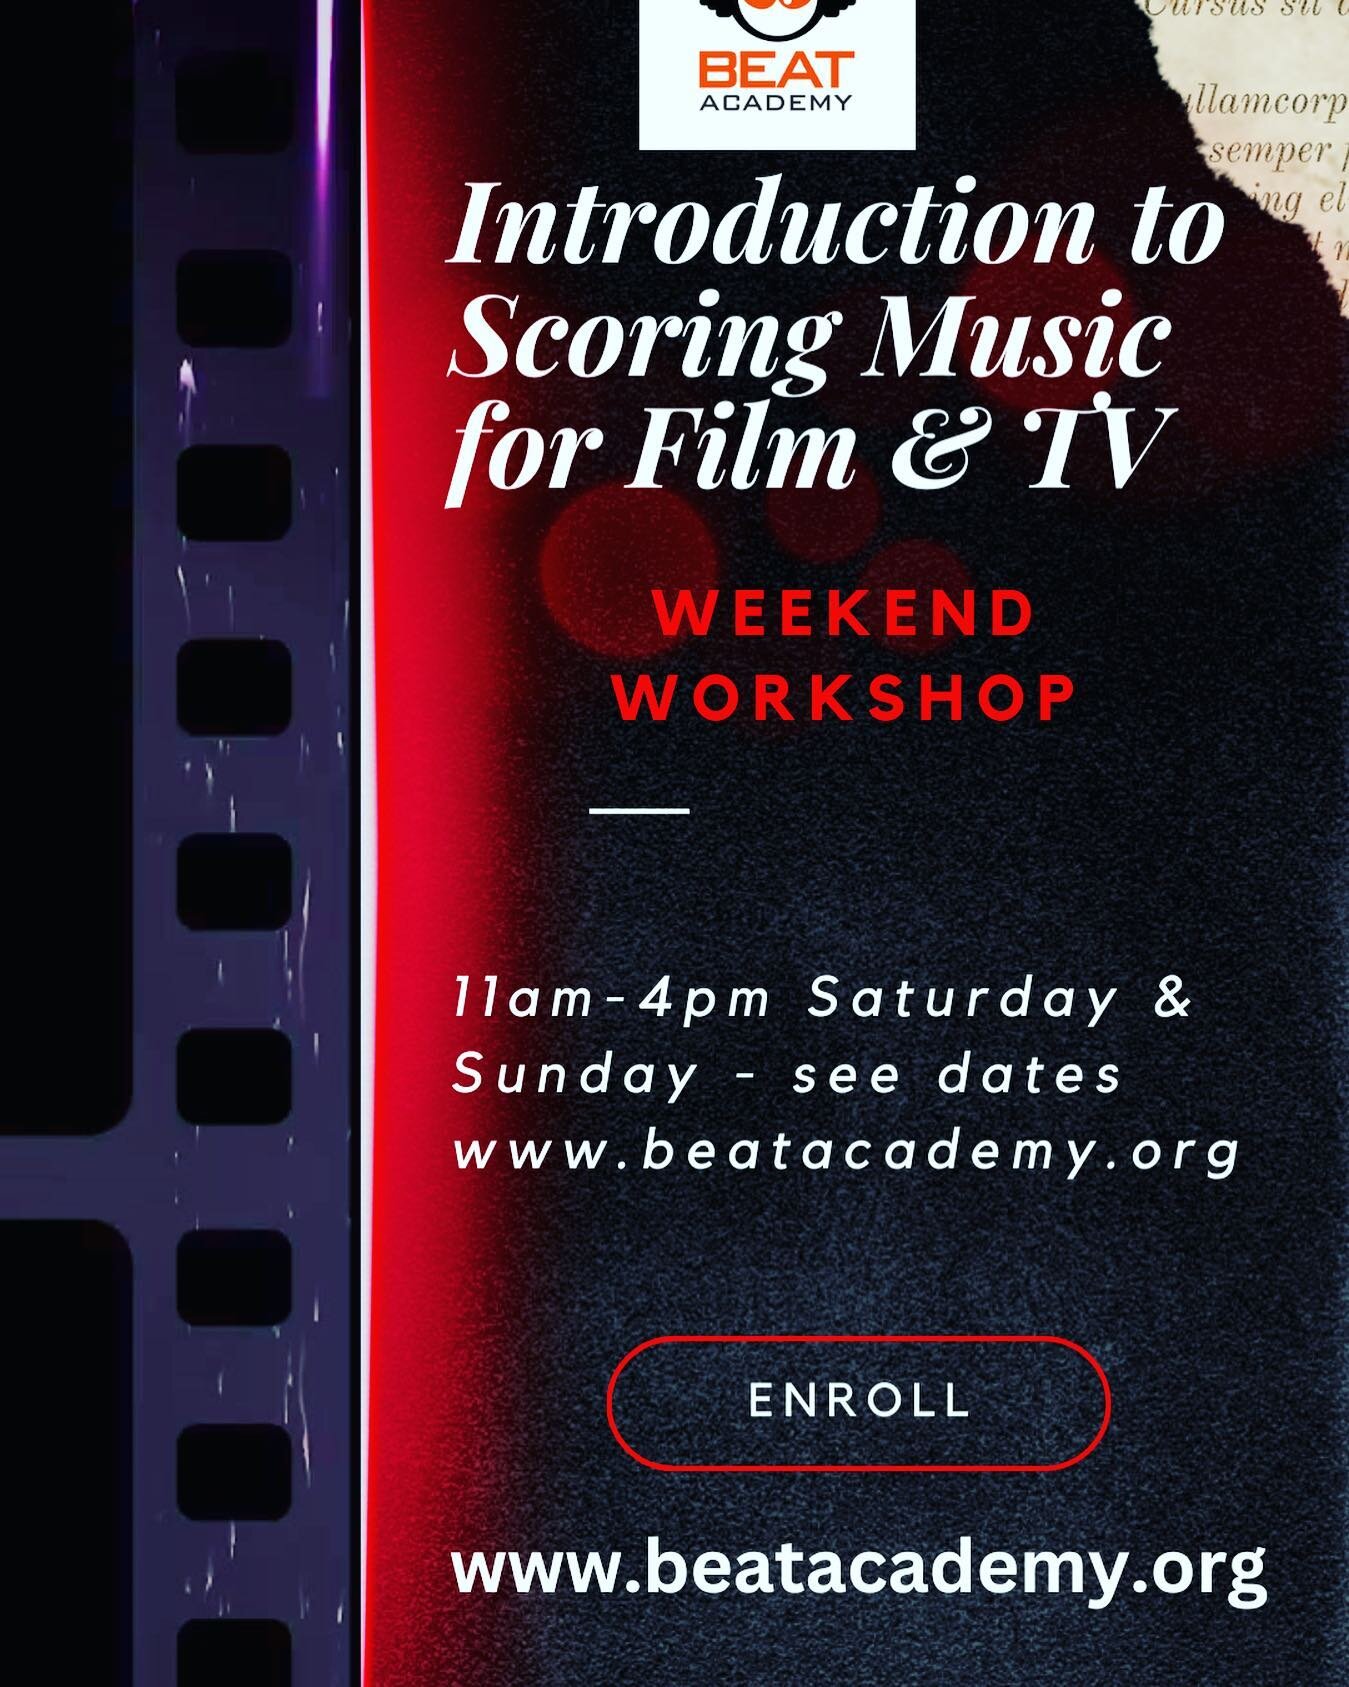 Join us for a fun summer weekend workshop @revival.la - Introduction To Film/TV Scoring !! This will be a good one!! Link in bio! 
#filmscoring #filmcomposer #summervibes #summerworkshops #musicproducer #musicproduction #musicschool #logicprox #ablet